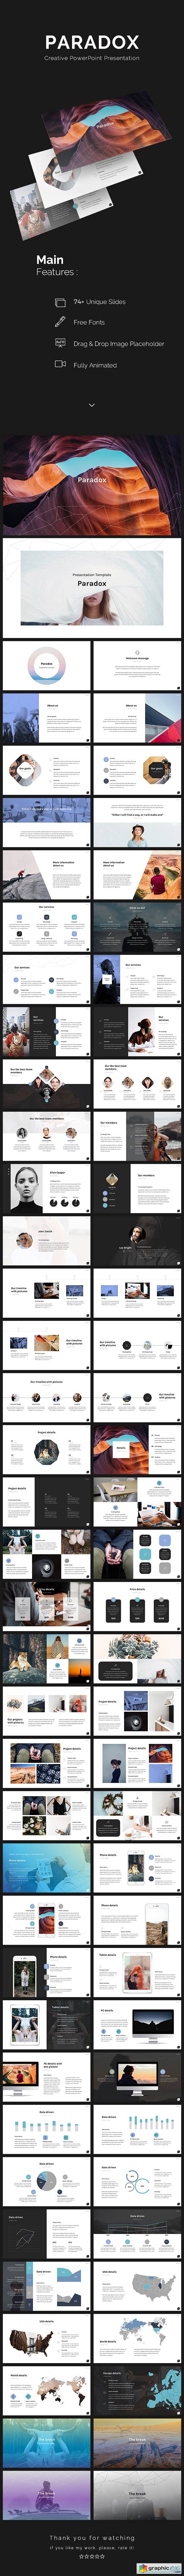 Paradox PowerPoint Template